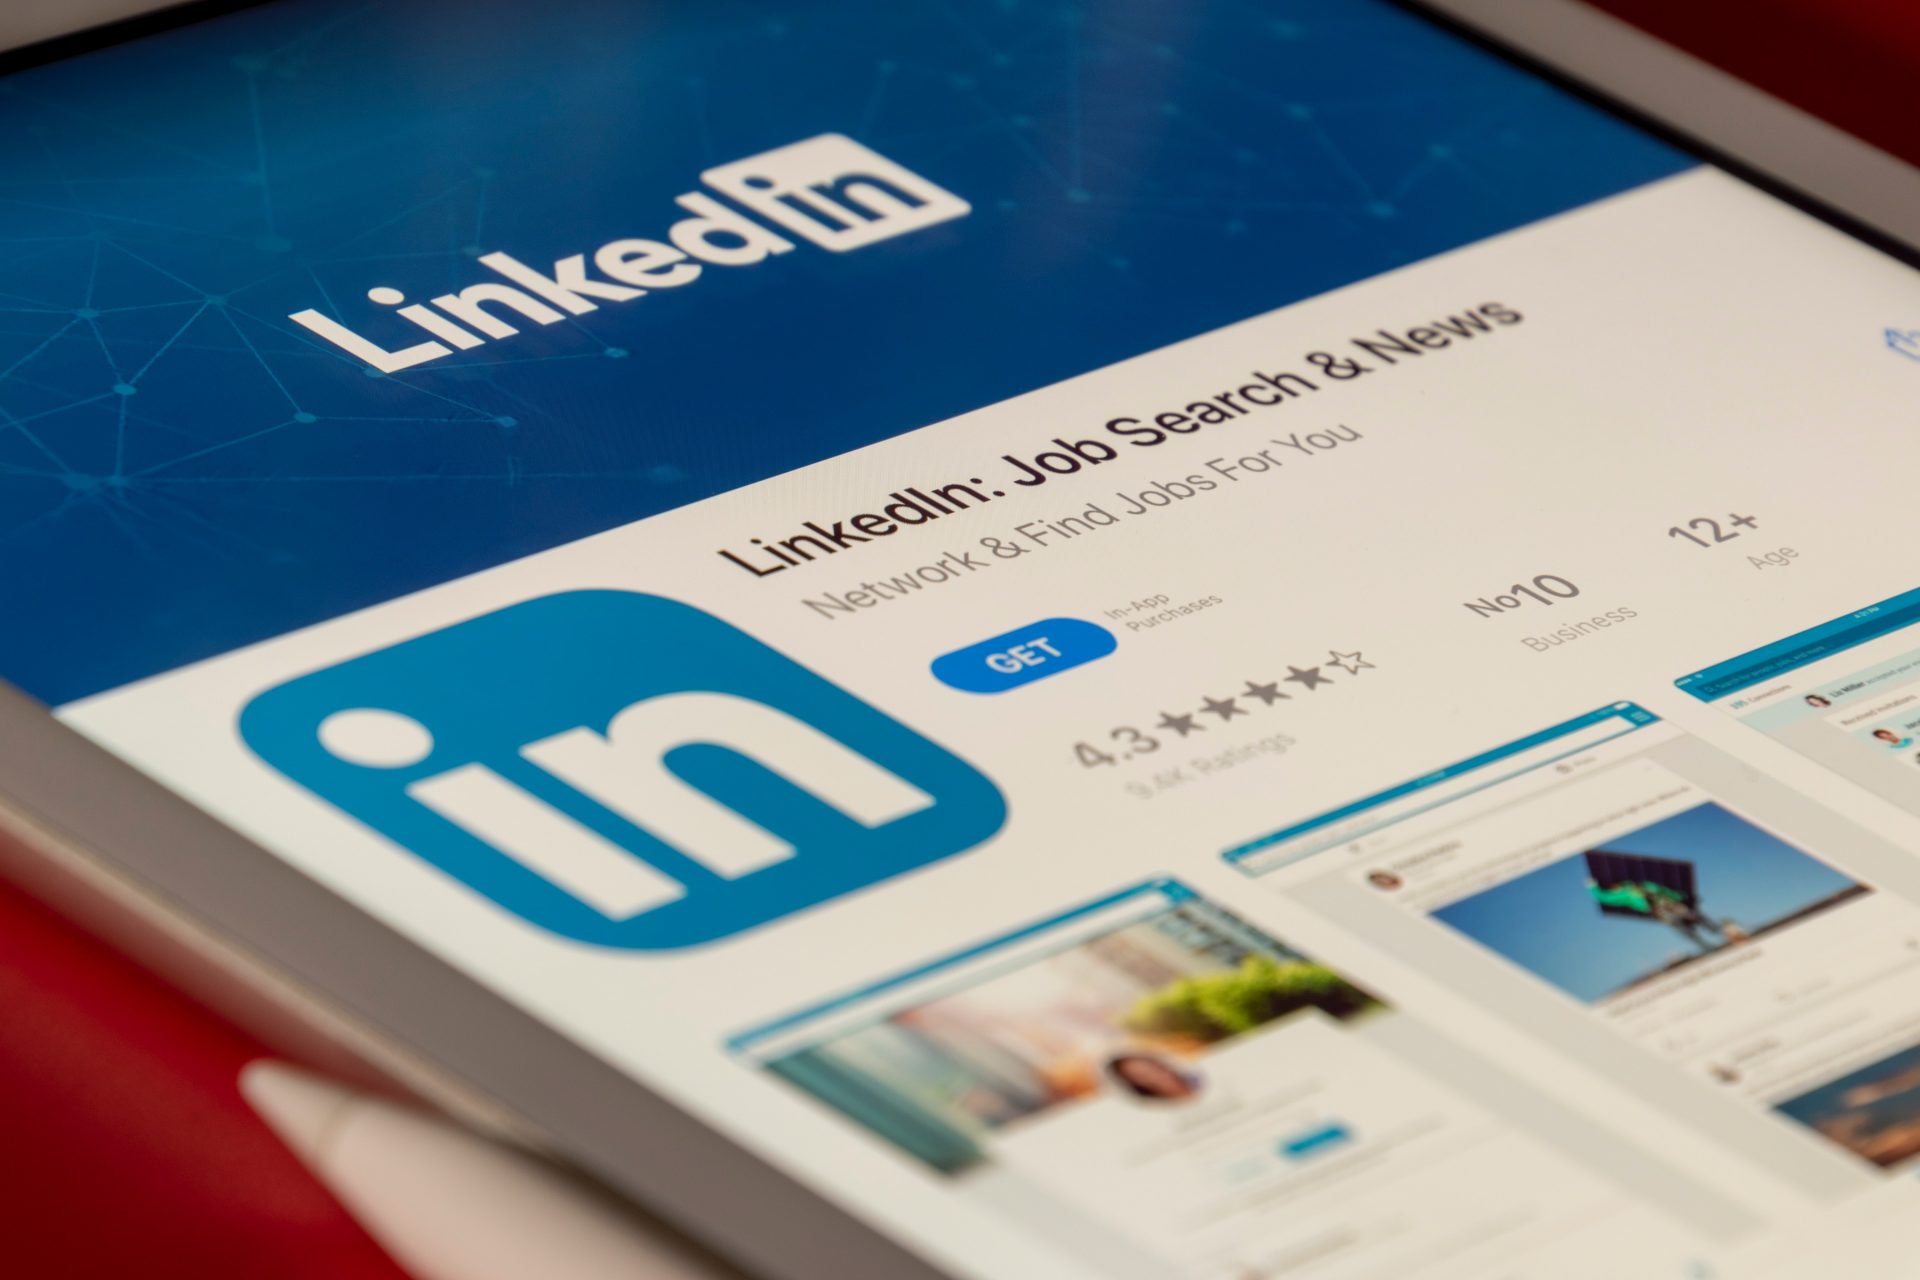 Tips to improve your personal LinkedIn profile